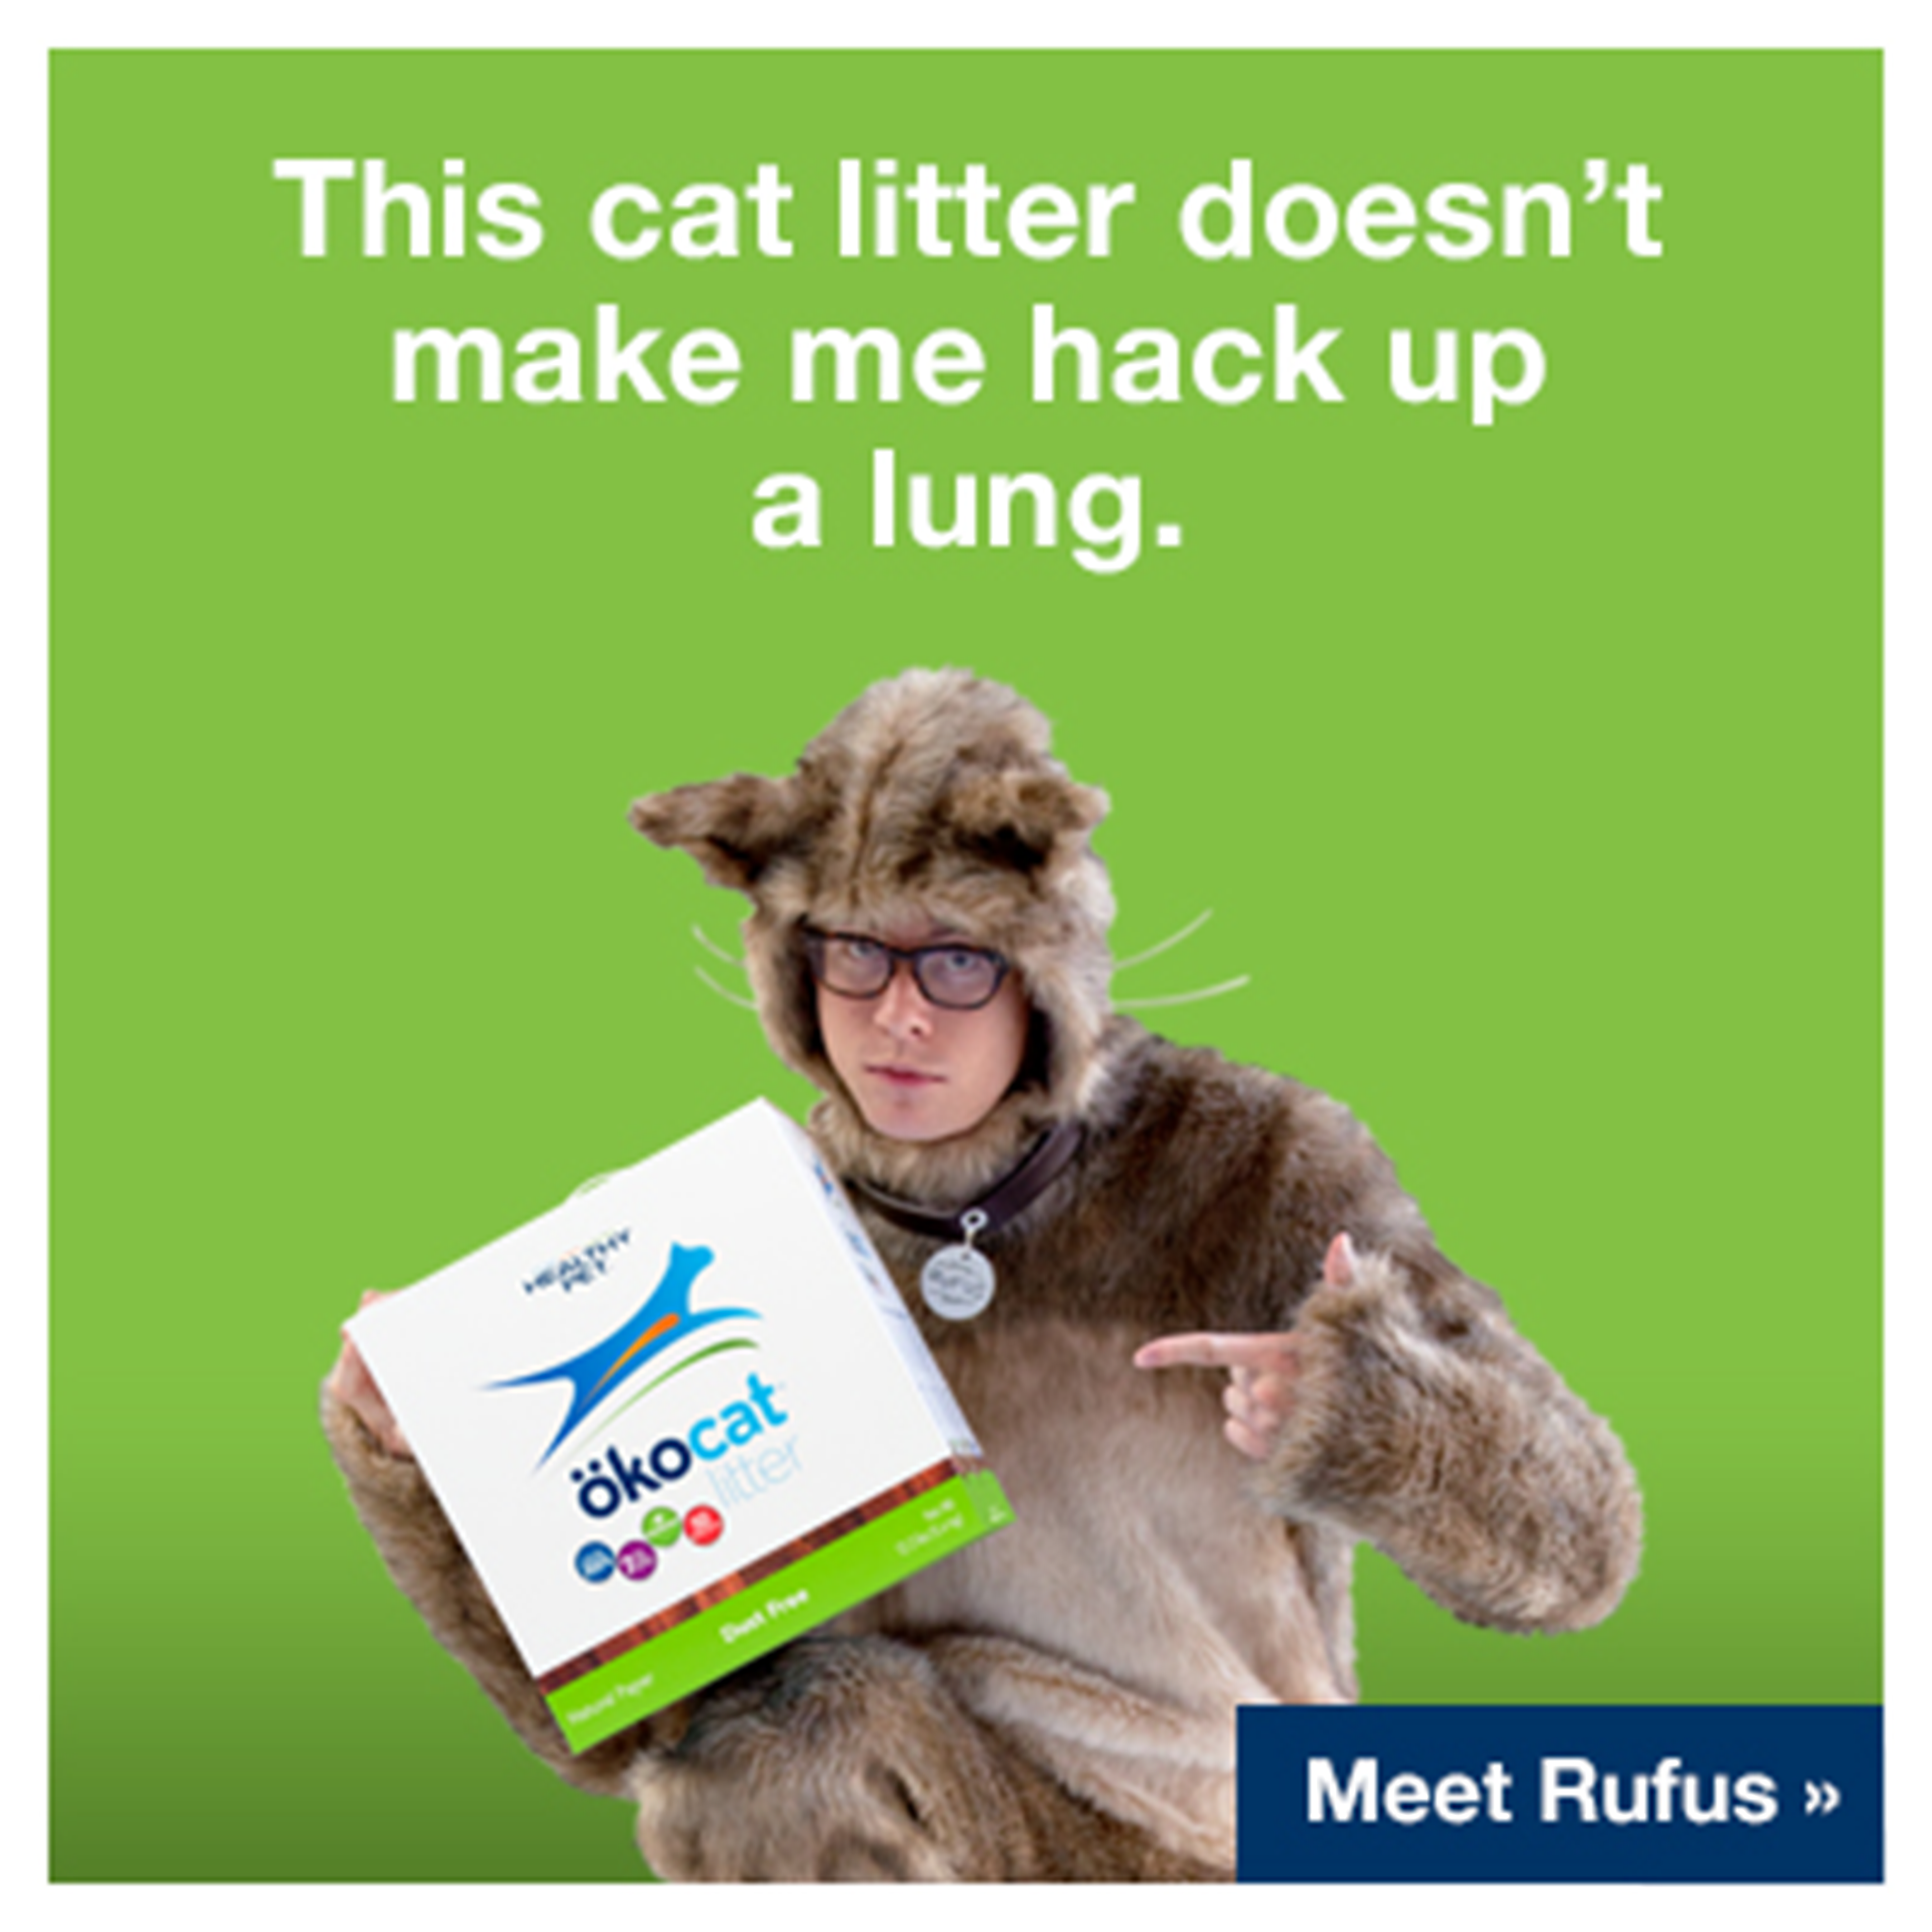 Advert execution with Rufus the cat holding a box of cat litter. The ad reads "This cat litter doesn't make me hack up a lung"